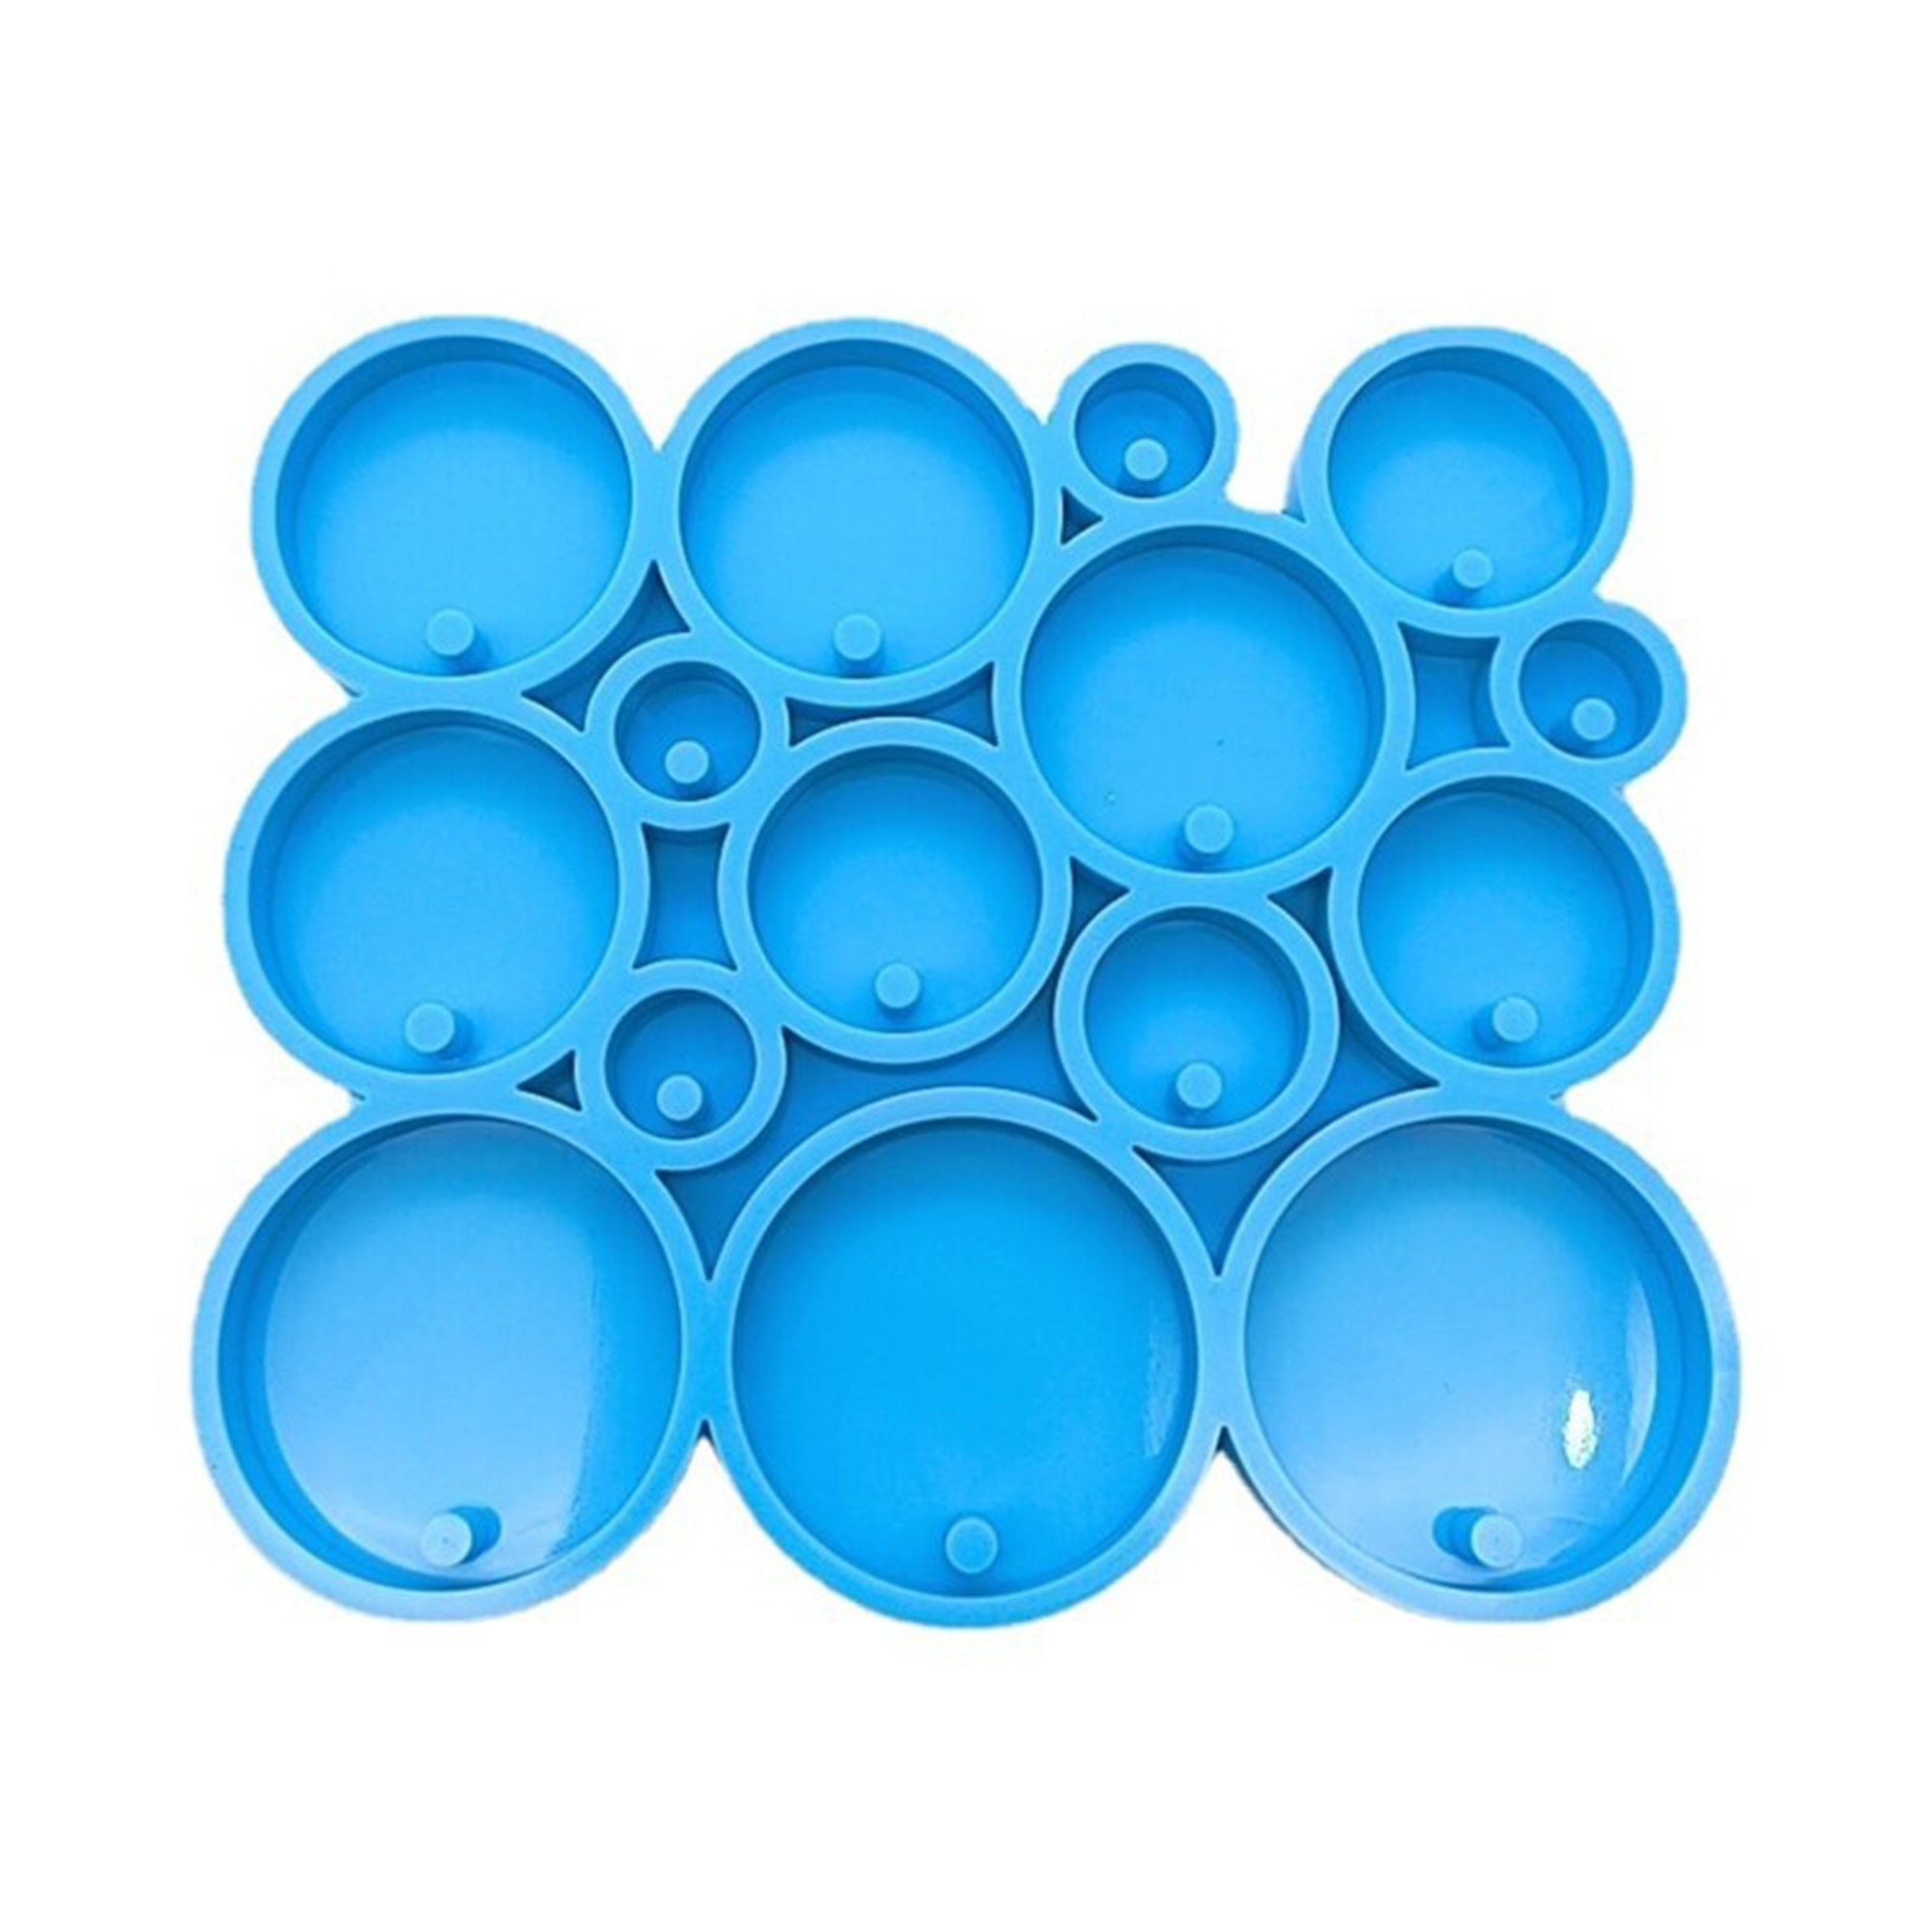 WANDIC Silicone Mould, 1 Pc Beads Mold Round Ball Resin Casting Mold for  DIY Epoxy Pendant Necklace Bracelet Jewelry Making Handmade Craft